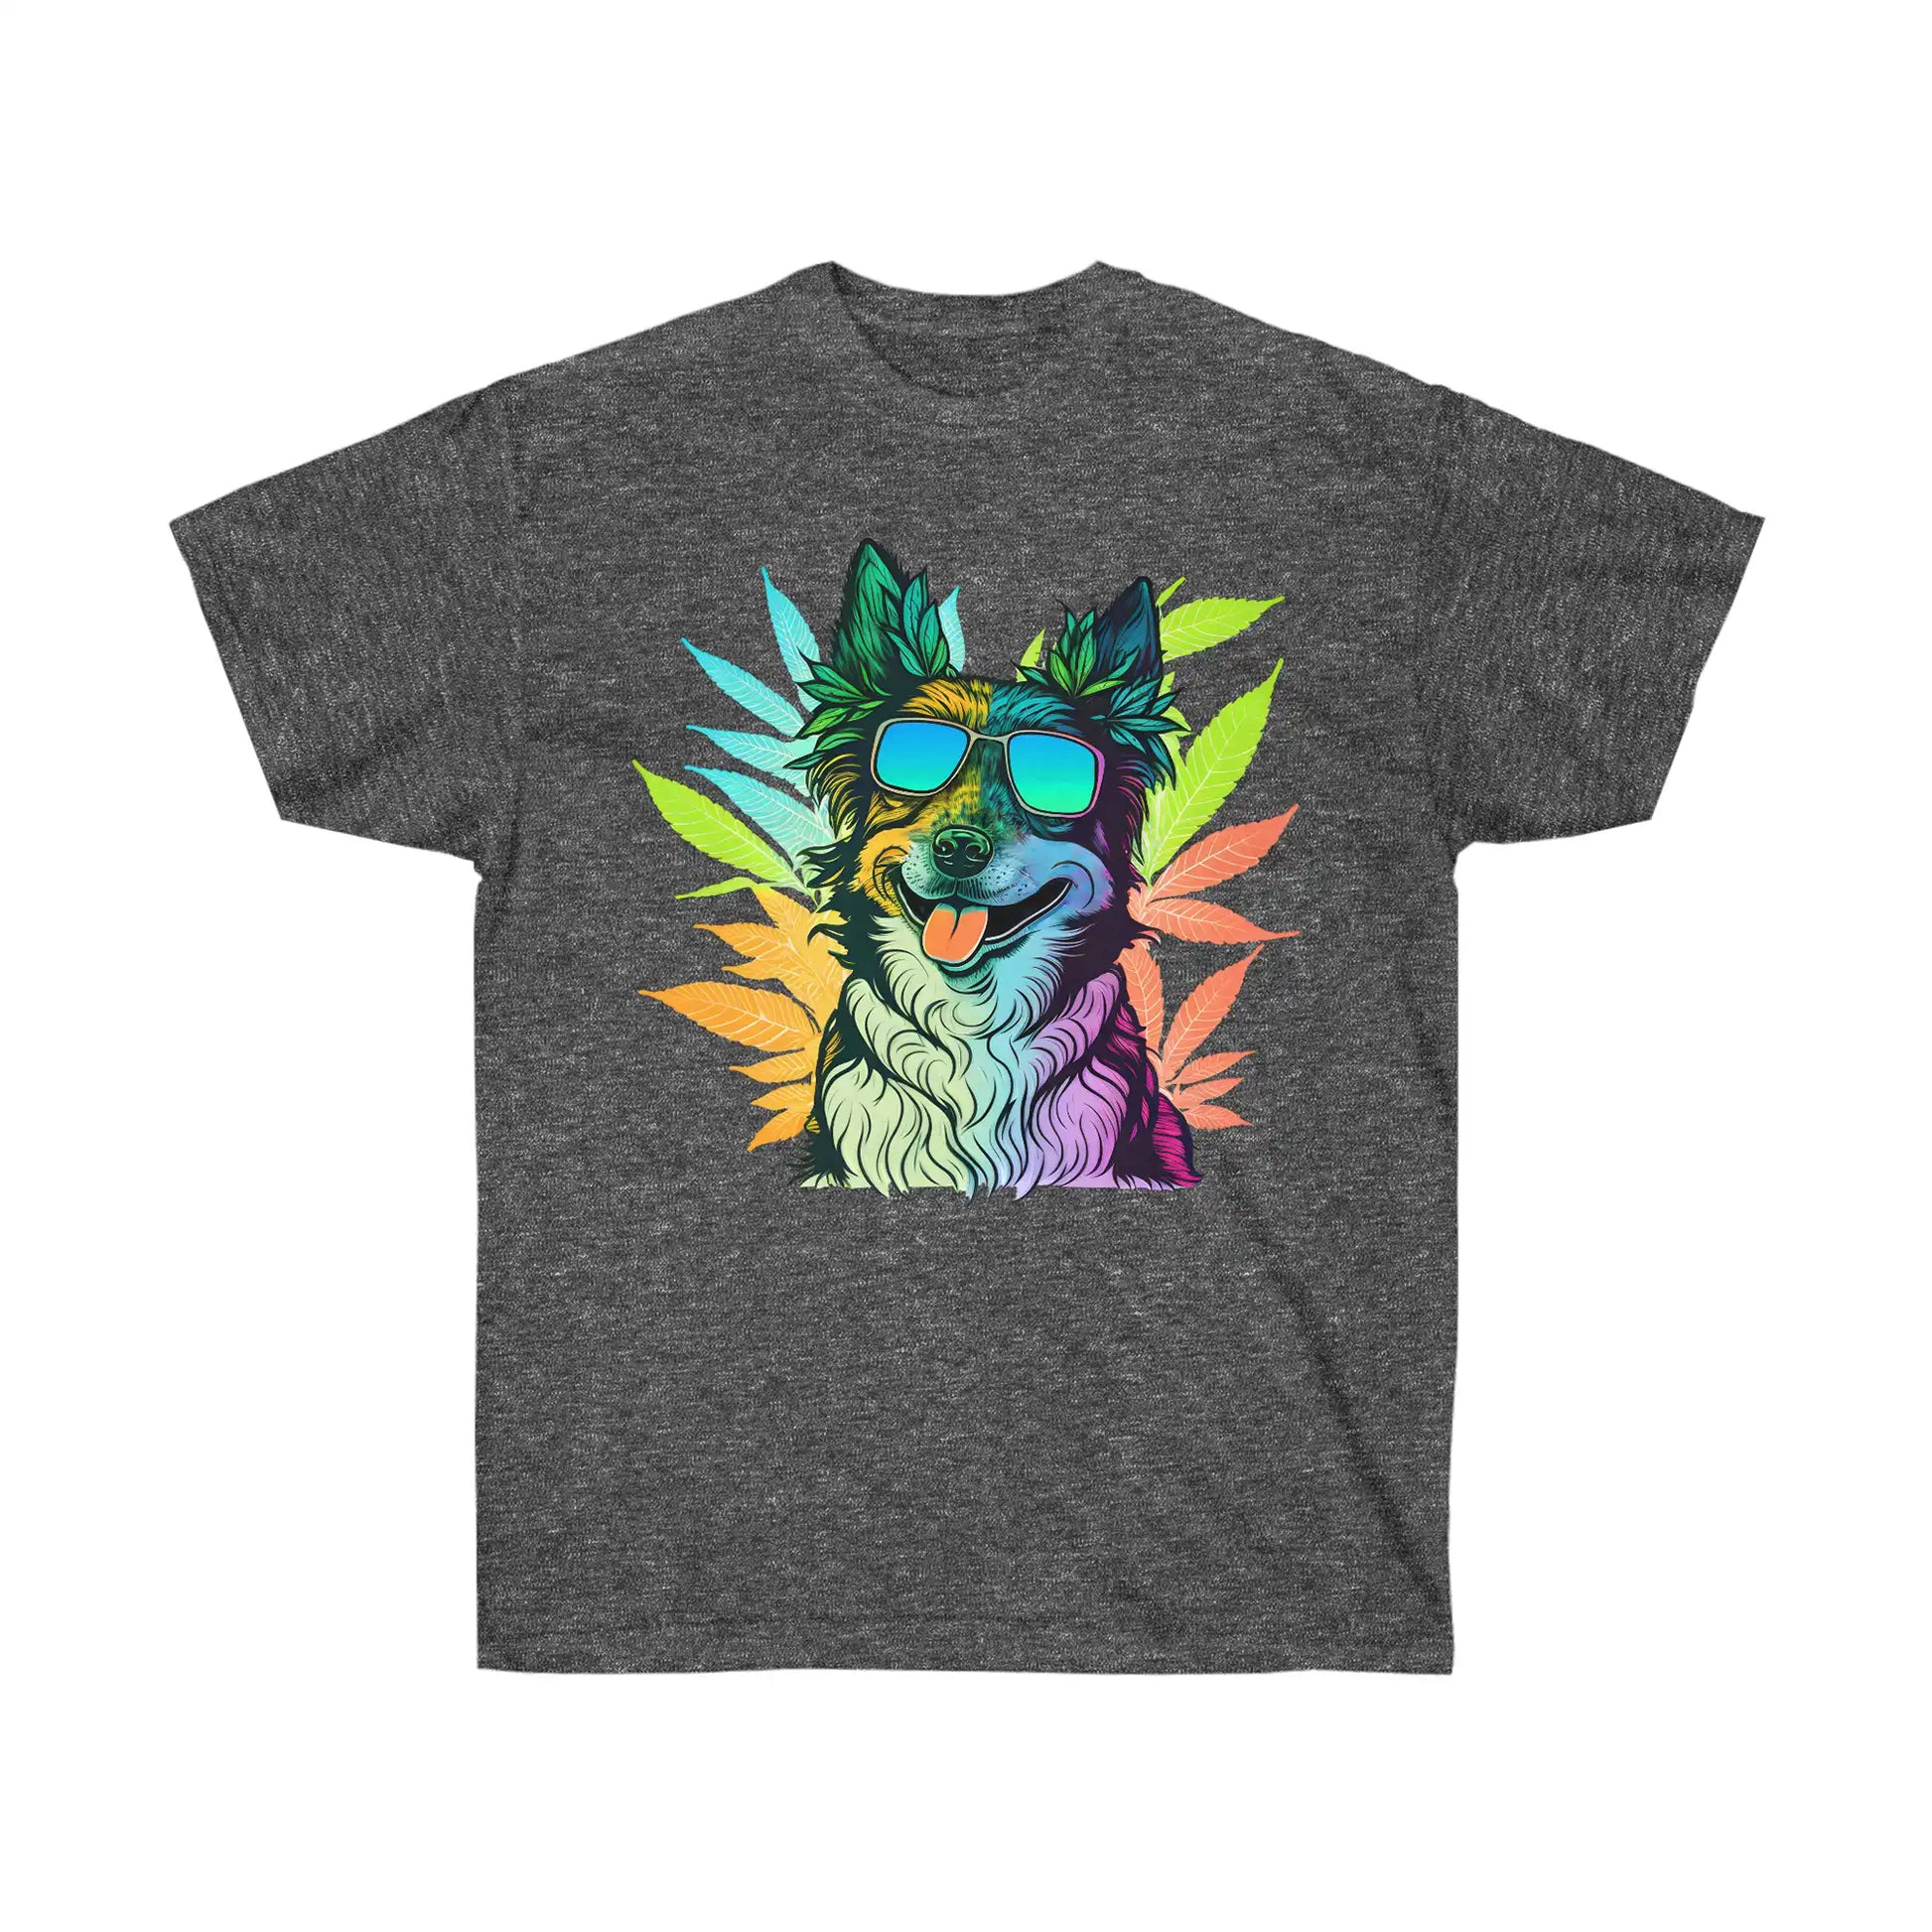 Cool Border Collie with shades surrounded by cannabis on a dark heather gray weed t-shirt